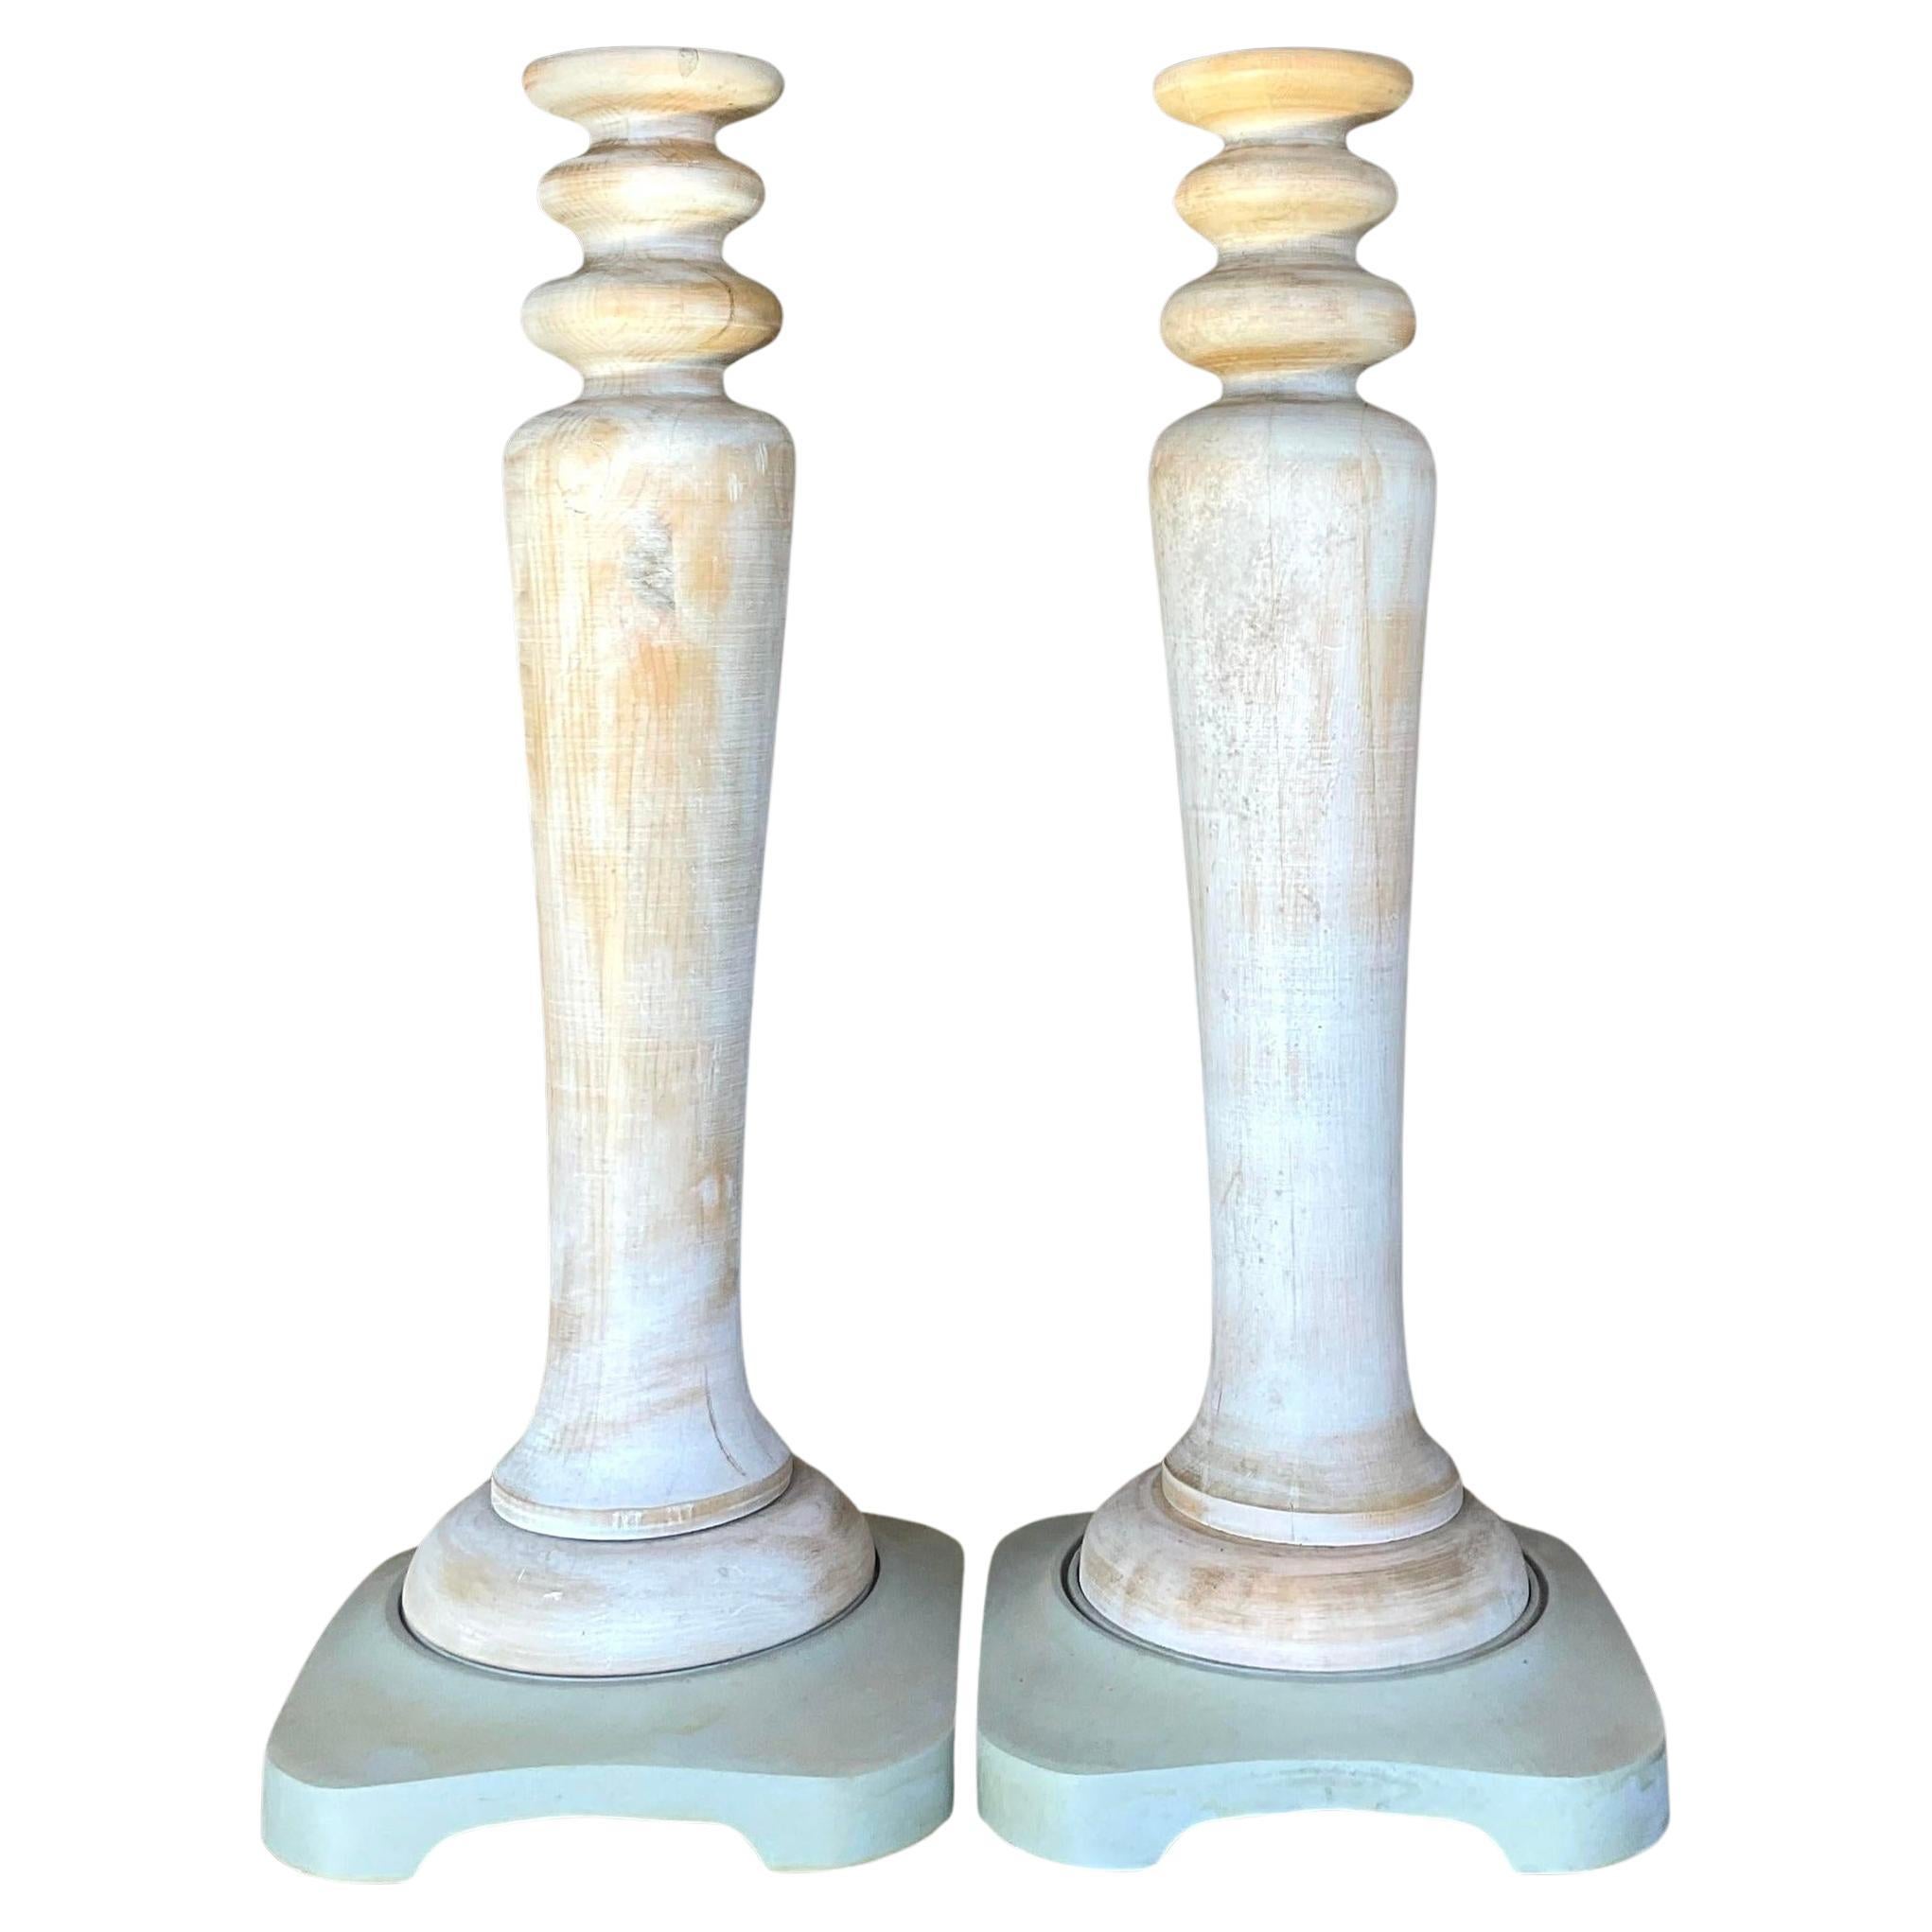 Vintage Boho Monumental Washed Wood Lamps - a Pair For Sale